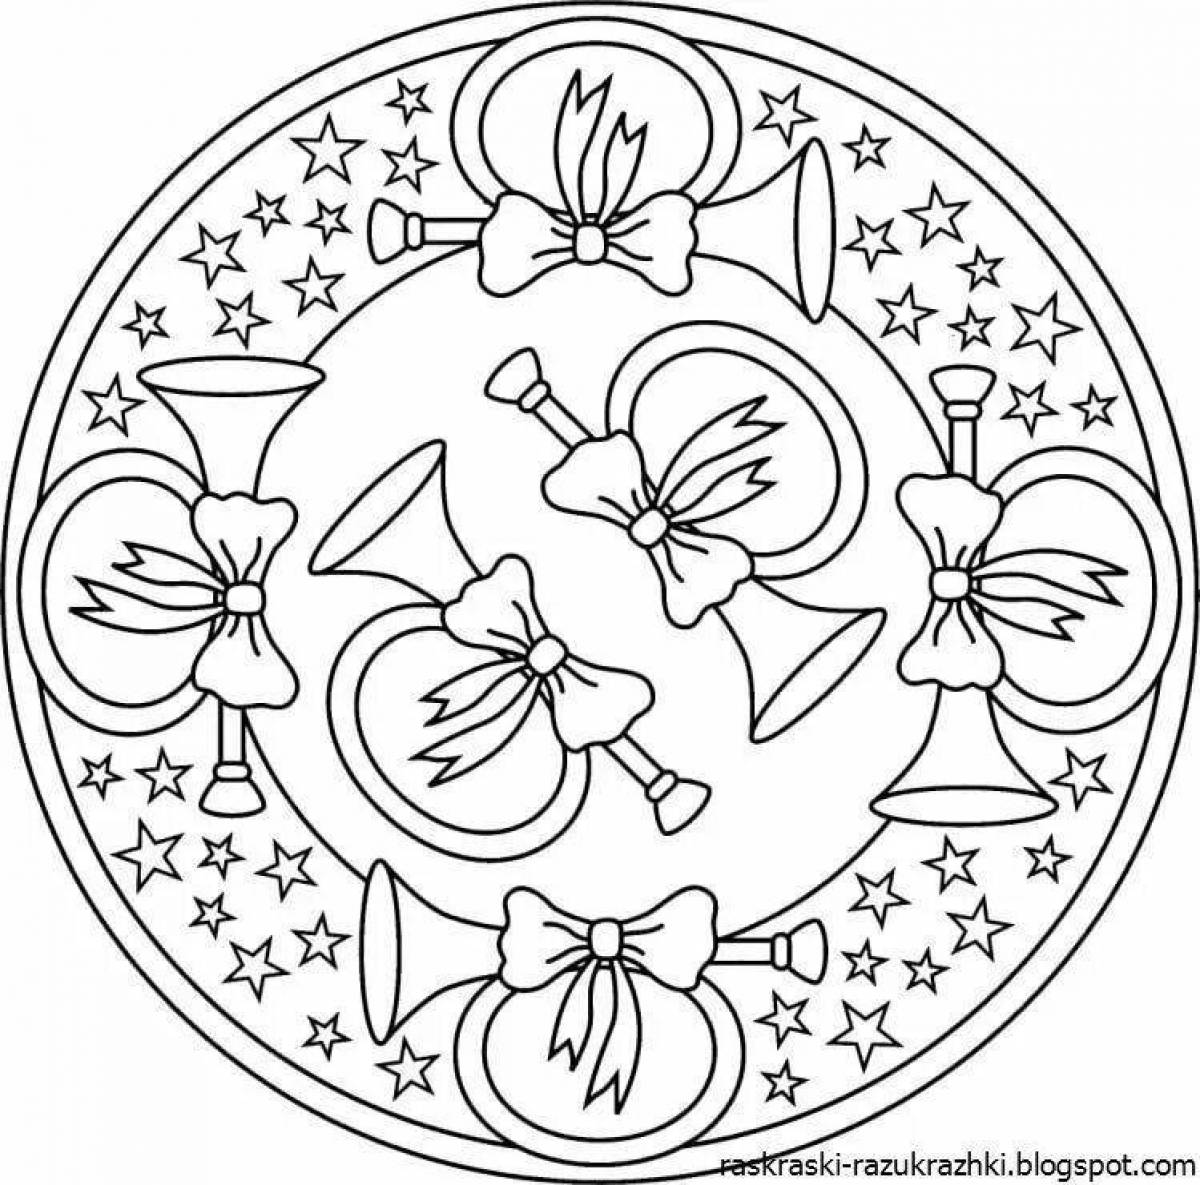 Gorgeous plate coloring page